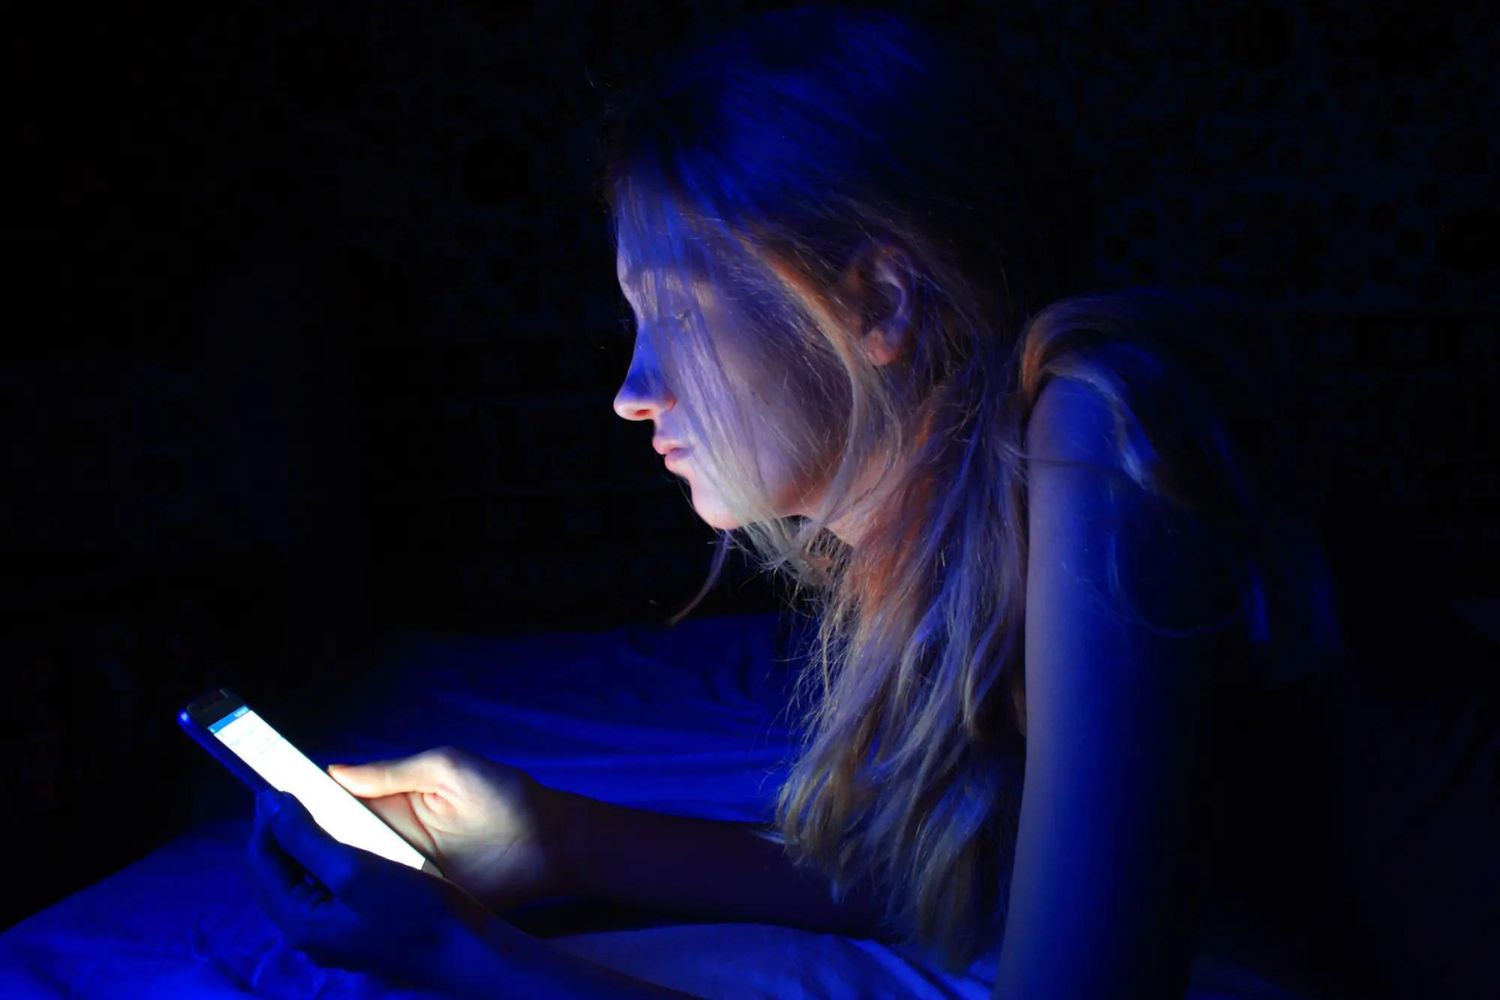 smartphone-insights-understanding-the-significance-of-blue-light-on-phones